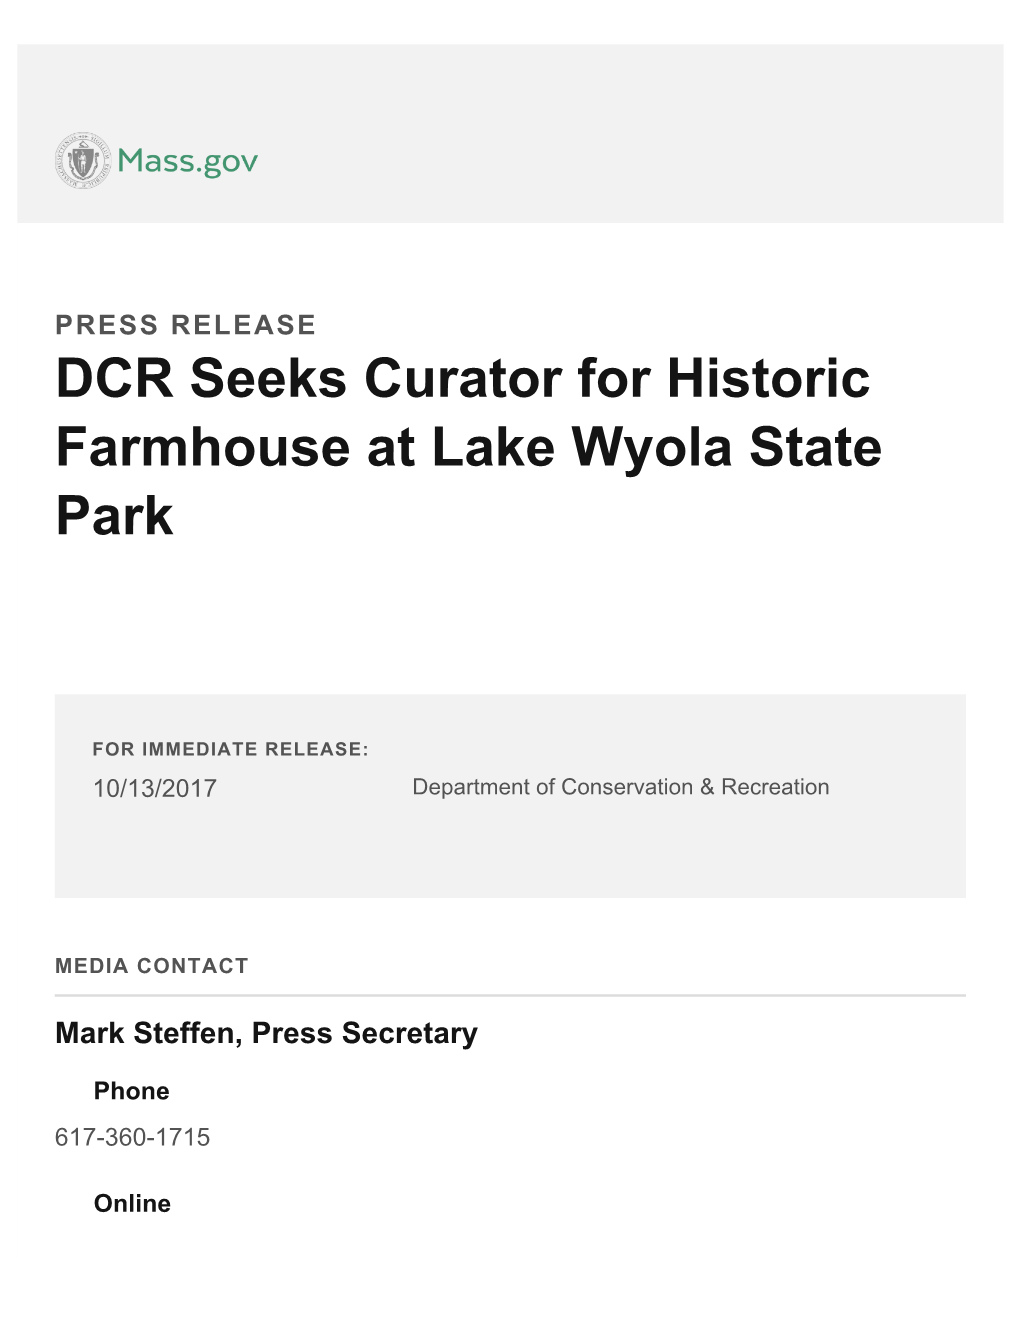 DCR Seeks Curator for Historic Farmhouse at Lake Wyola State Park